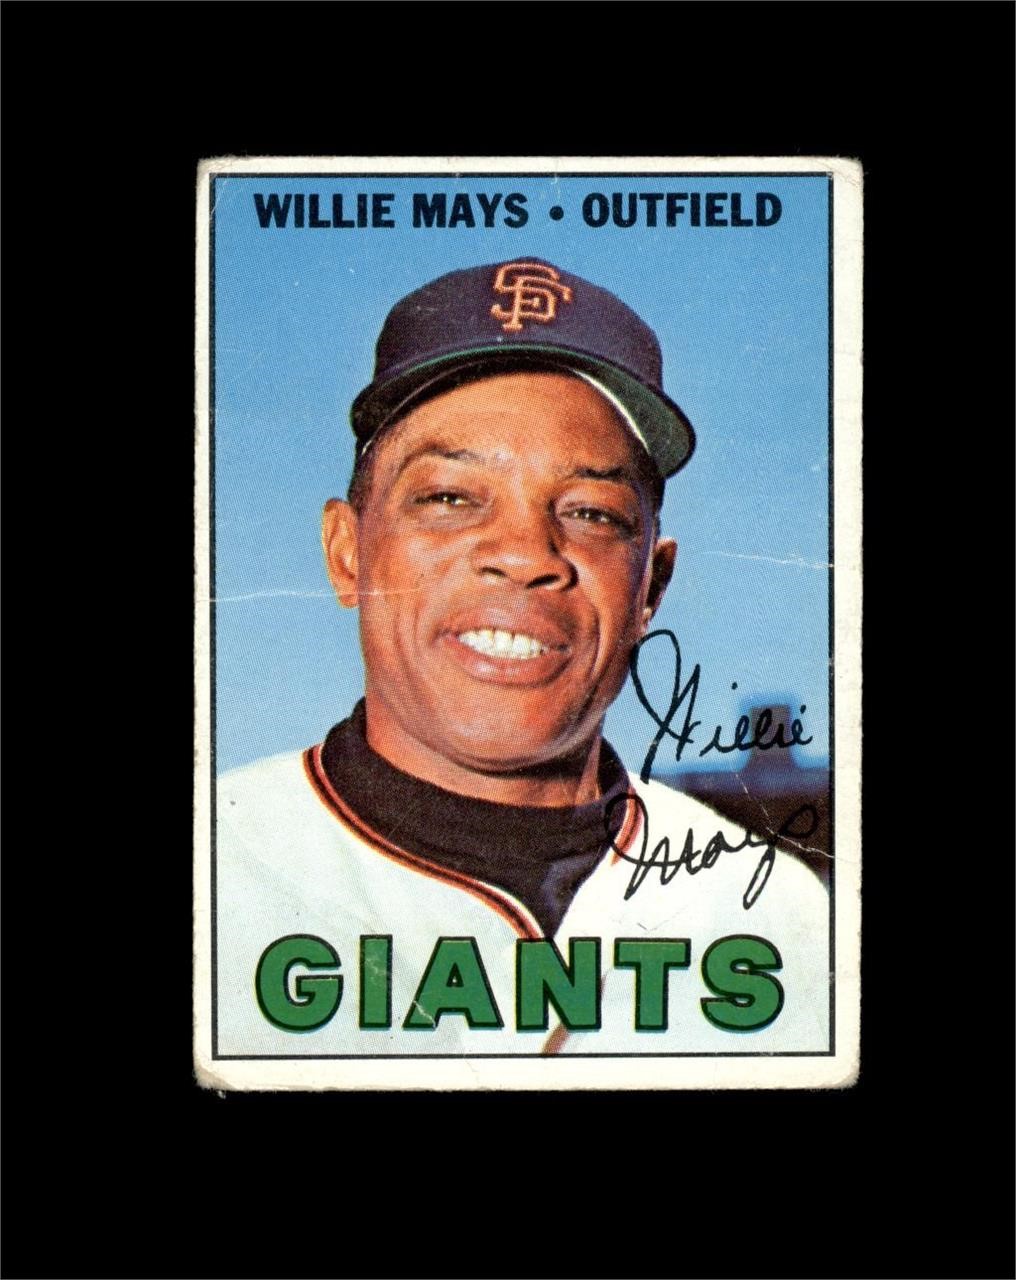 Vintage Sports Card Auction - Ends WED 4/17 9PM CST